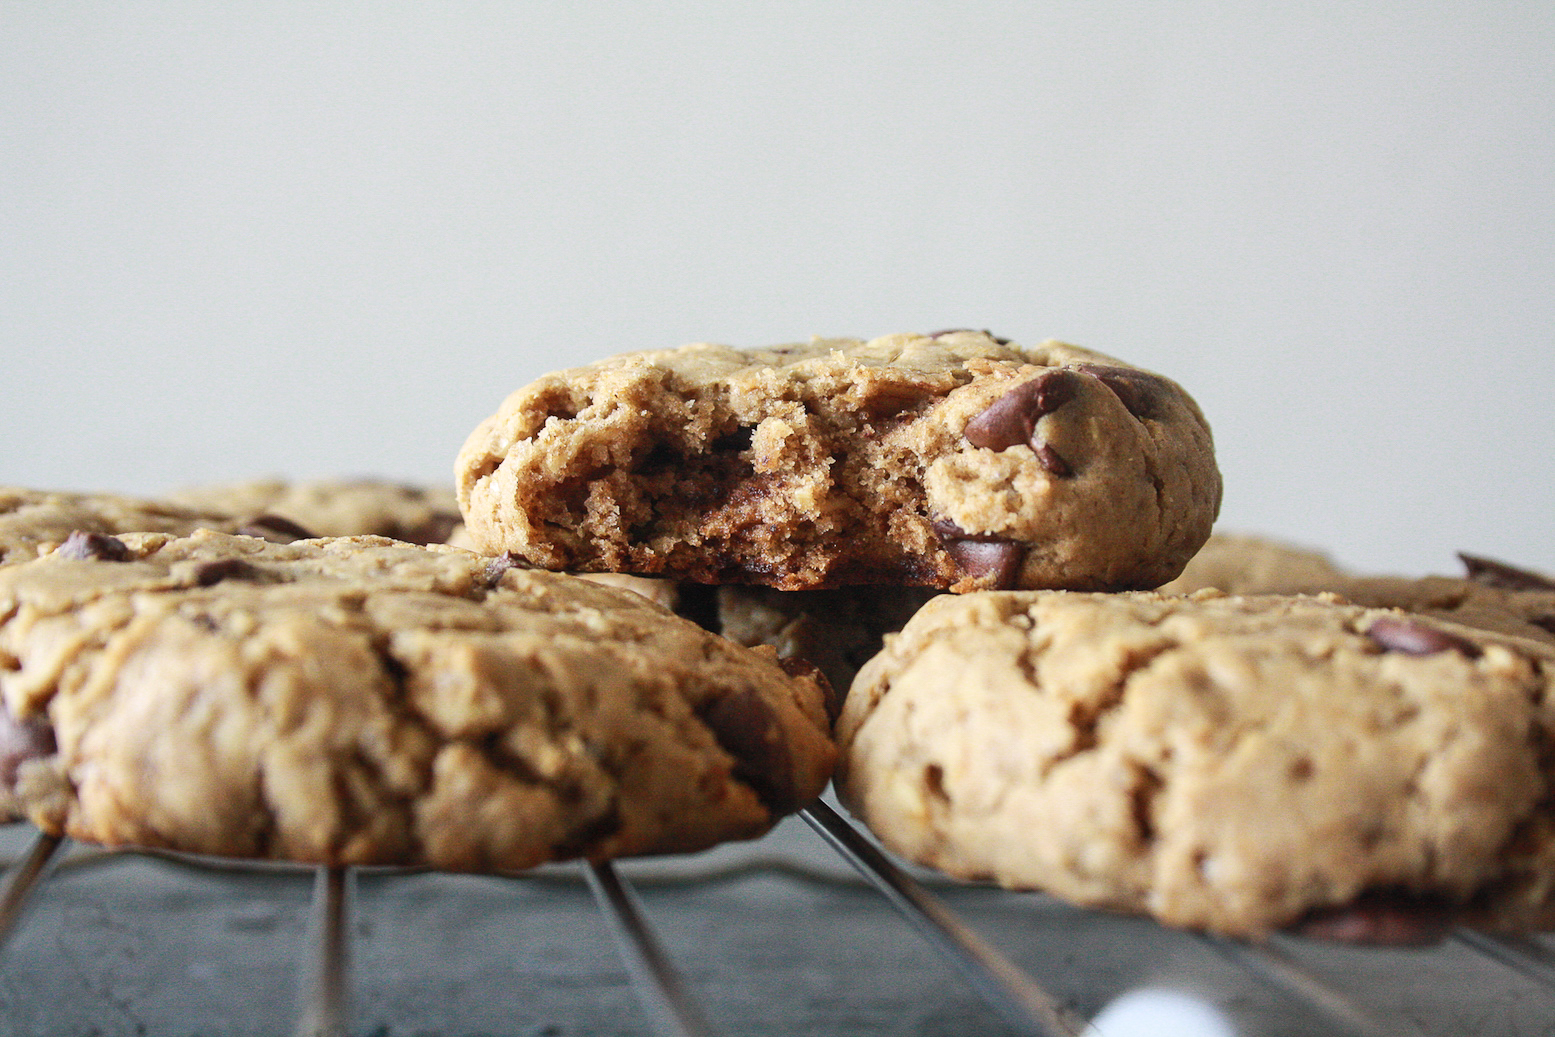 Soft and chewy chocolate chip cookies made with buckwheat flour!